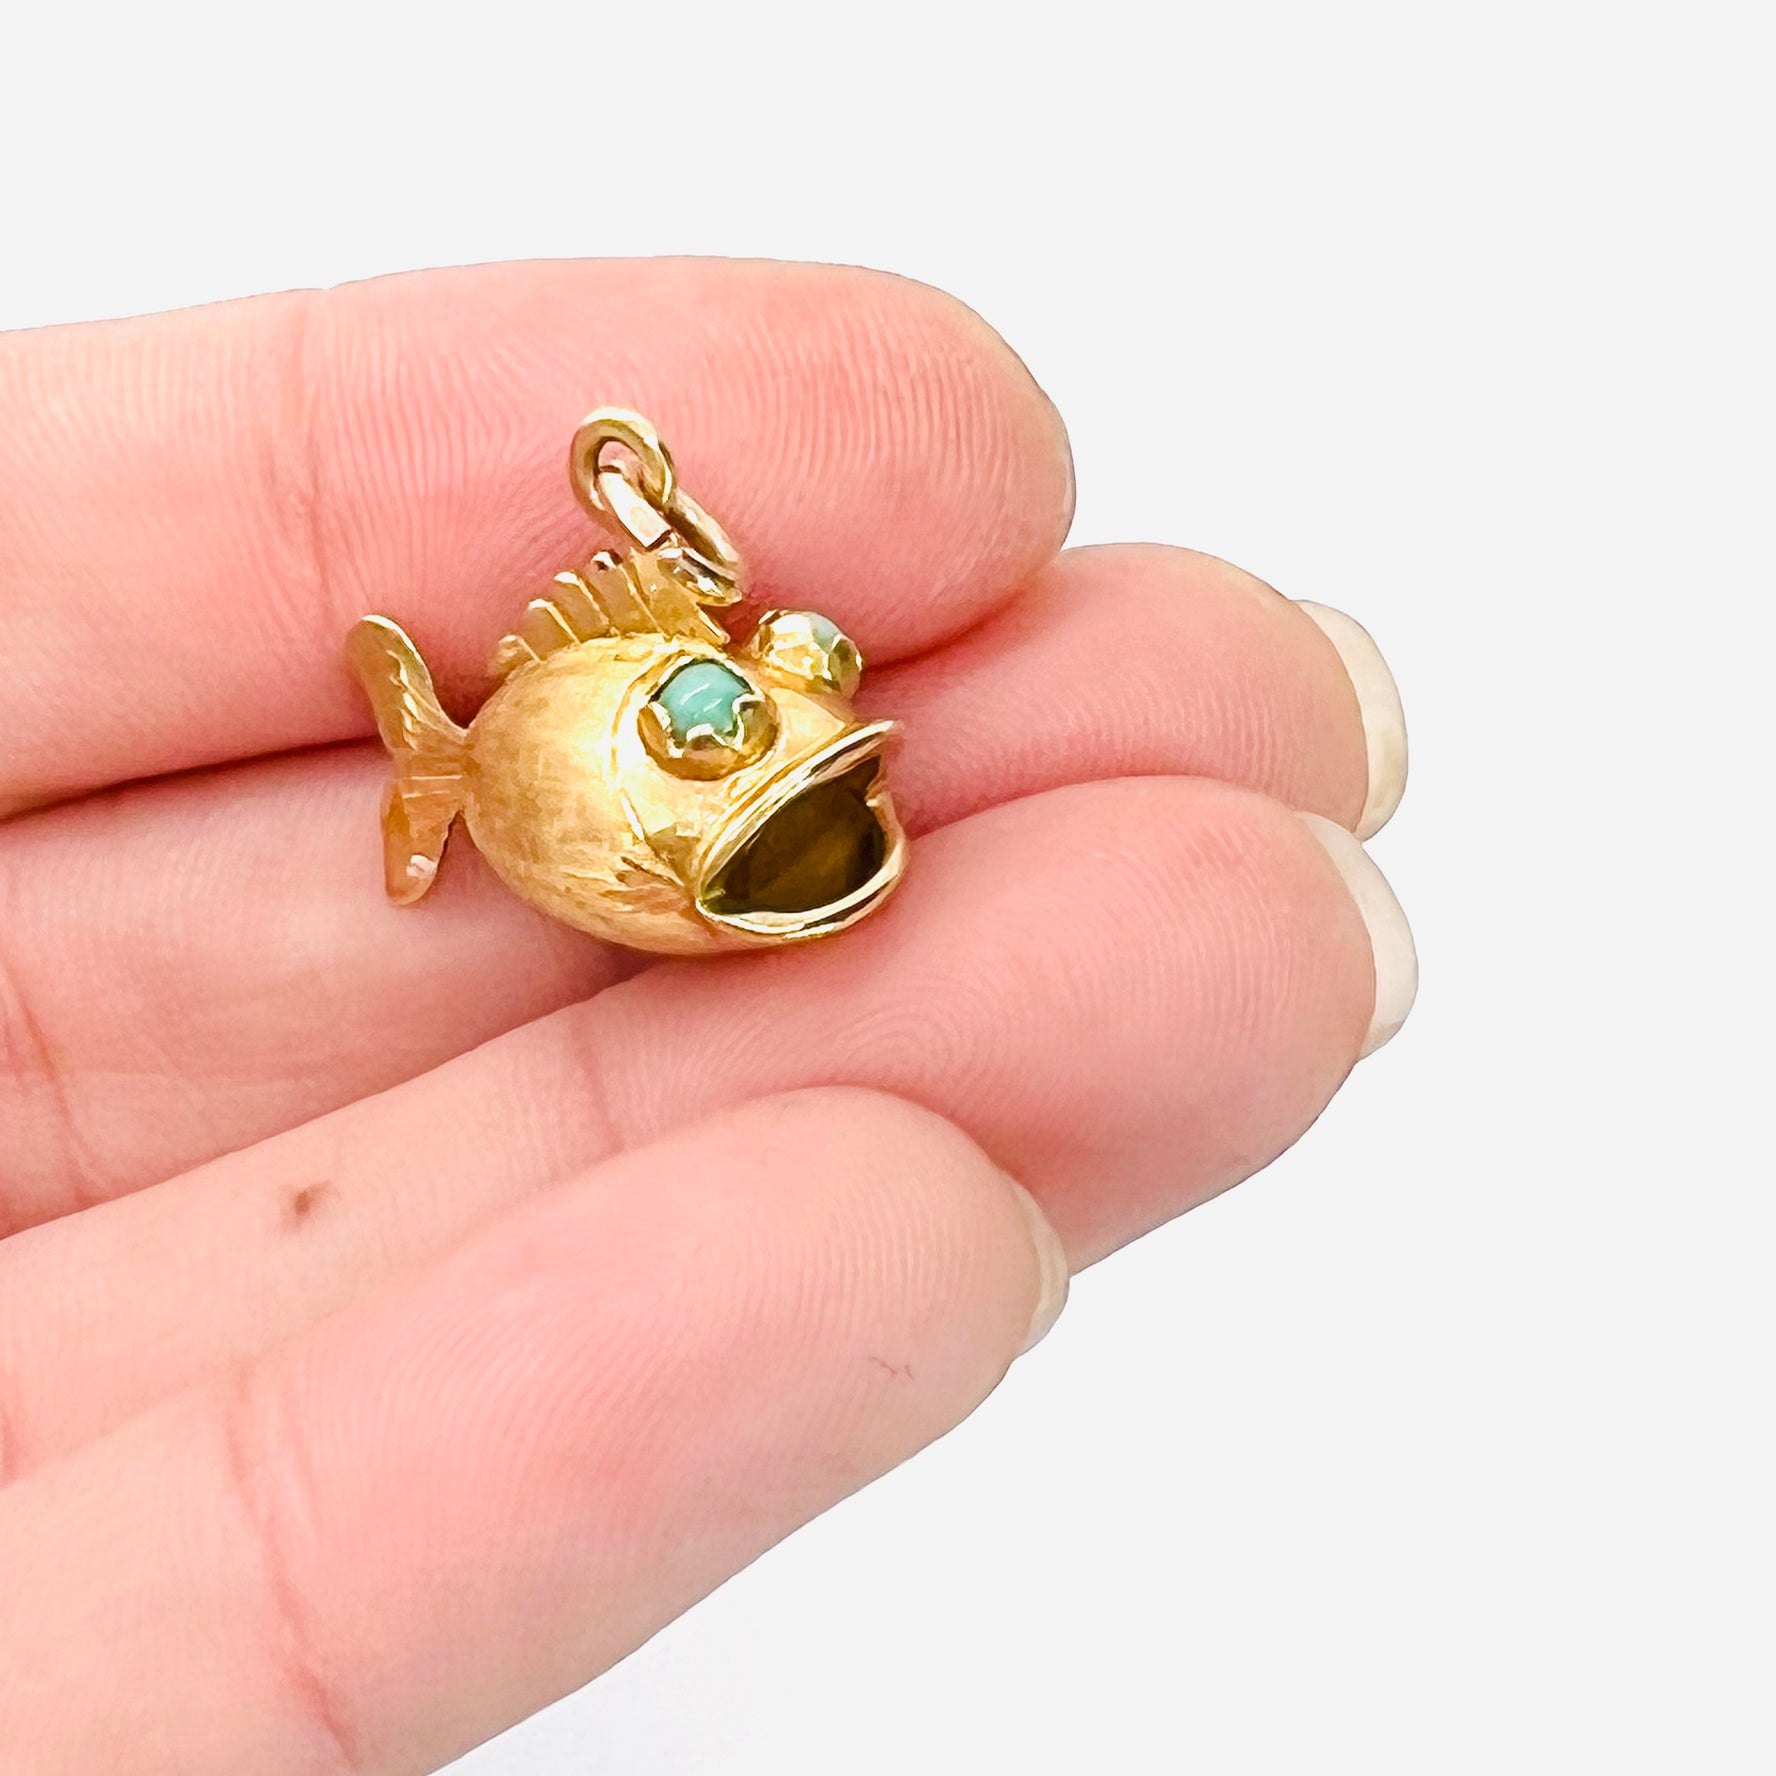 14k antique fish charm with turquoise eyes